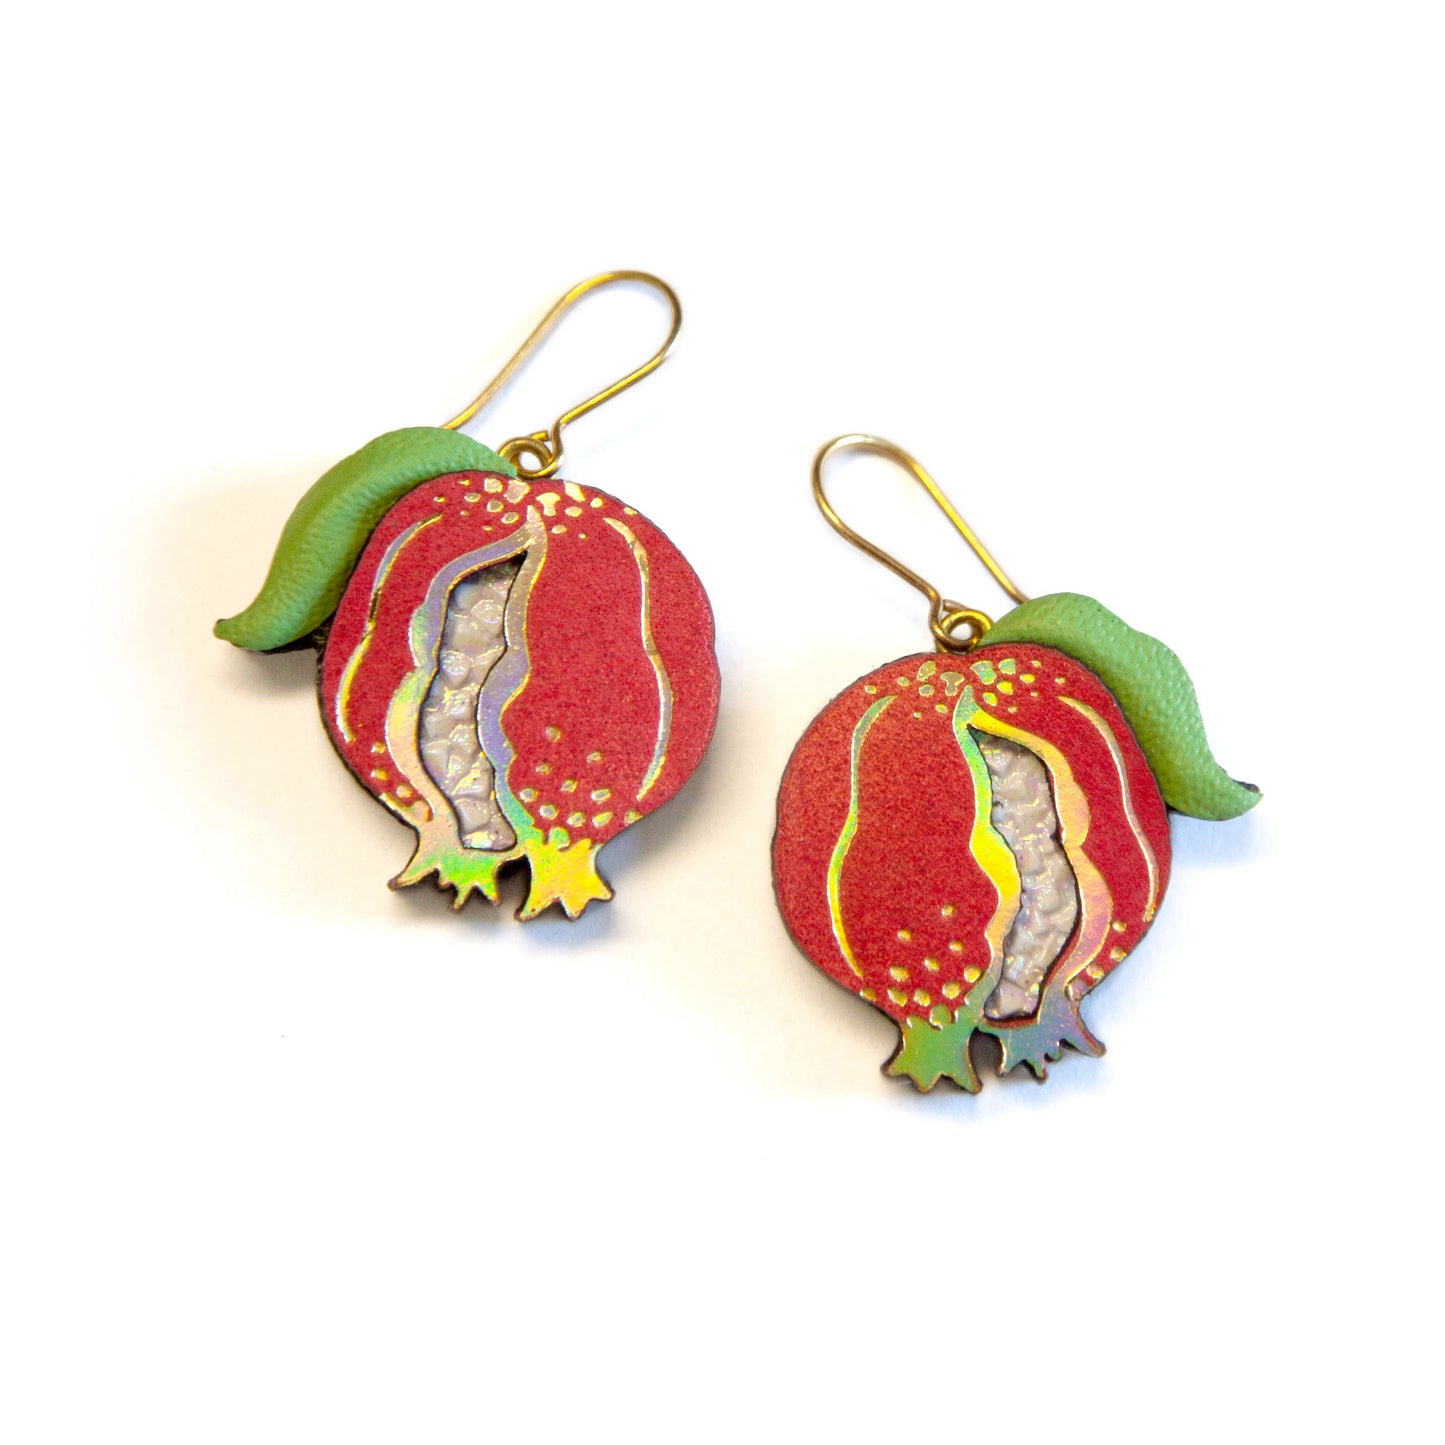 leather pomegranate earrings with green leaves